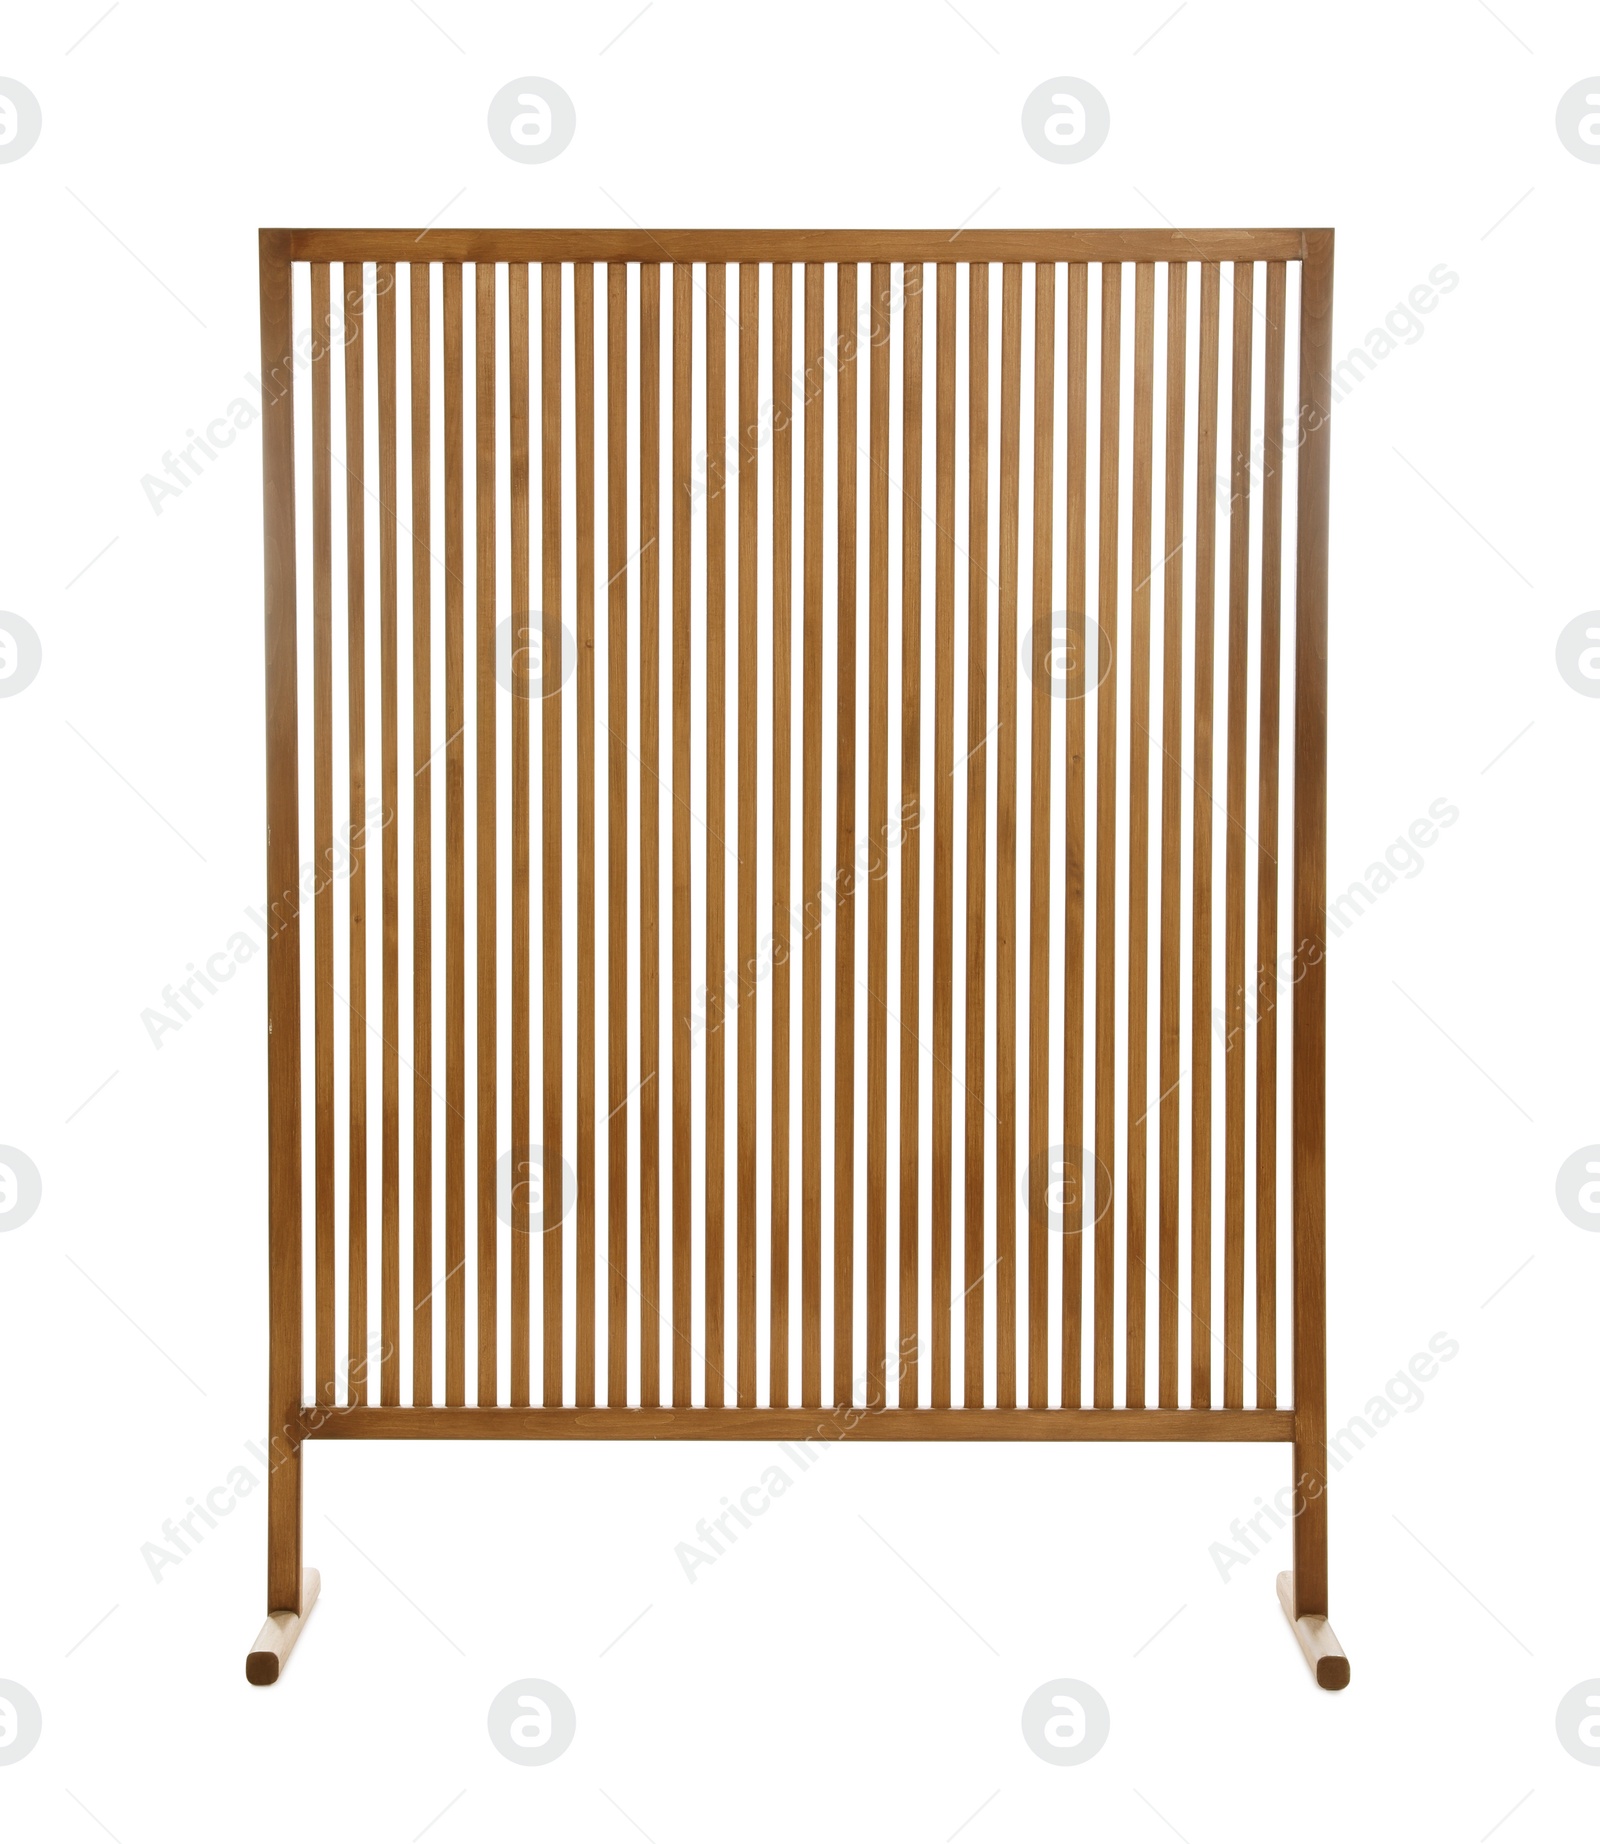 Photo of Wooden room divider screen isolated on white